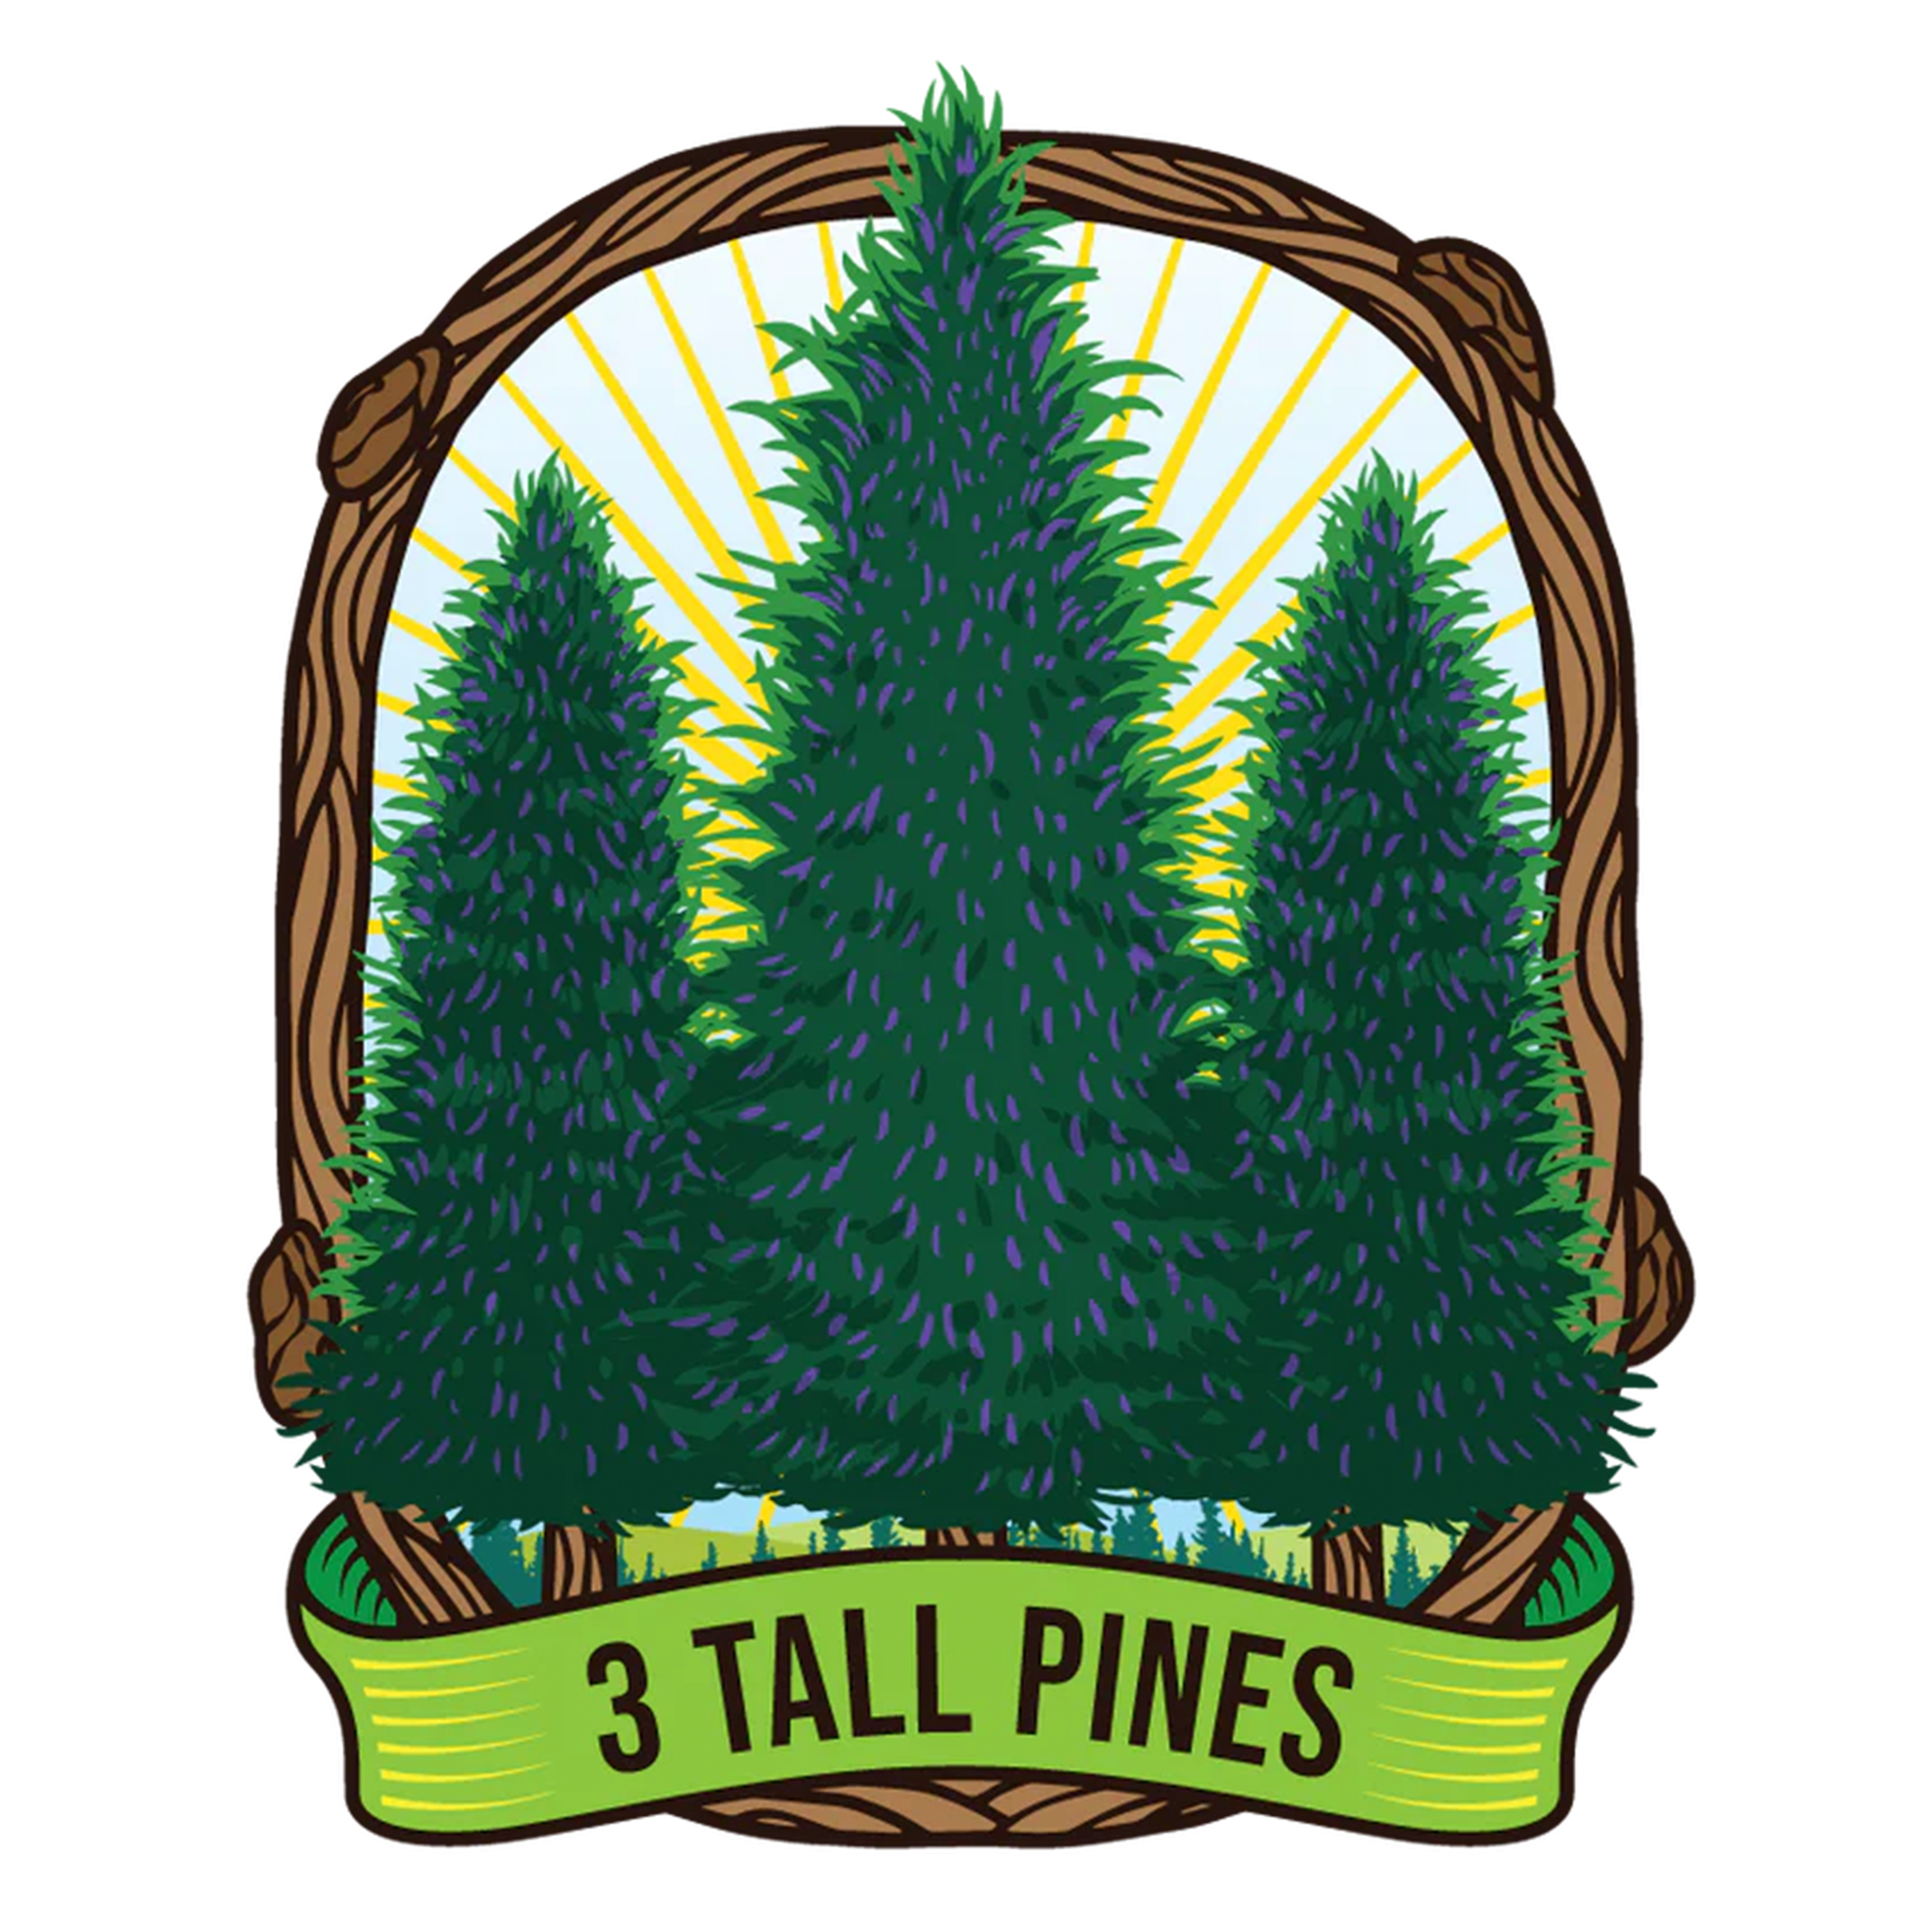 3 Tall Pines